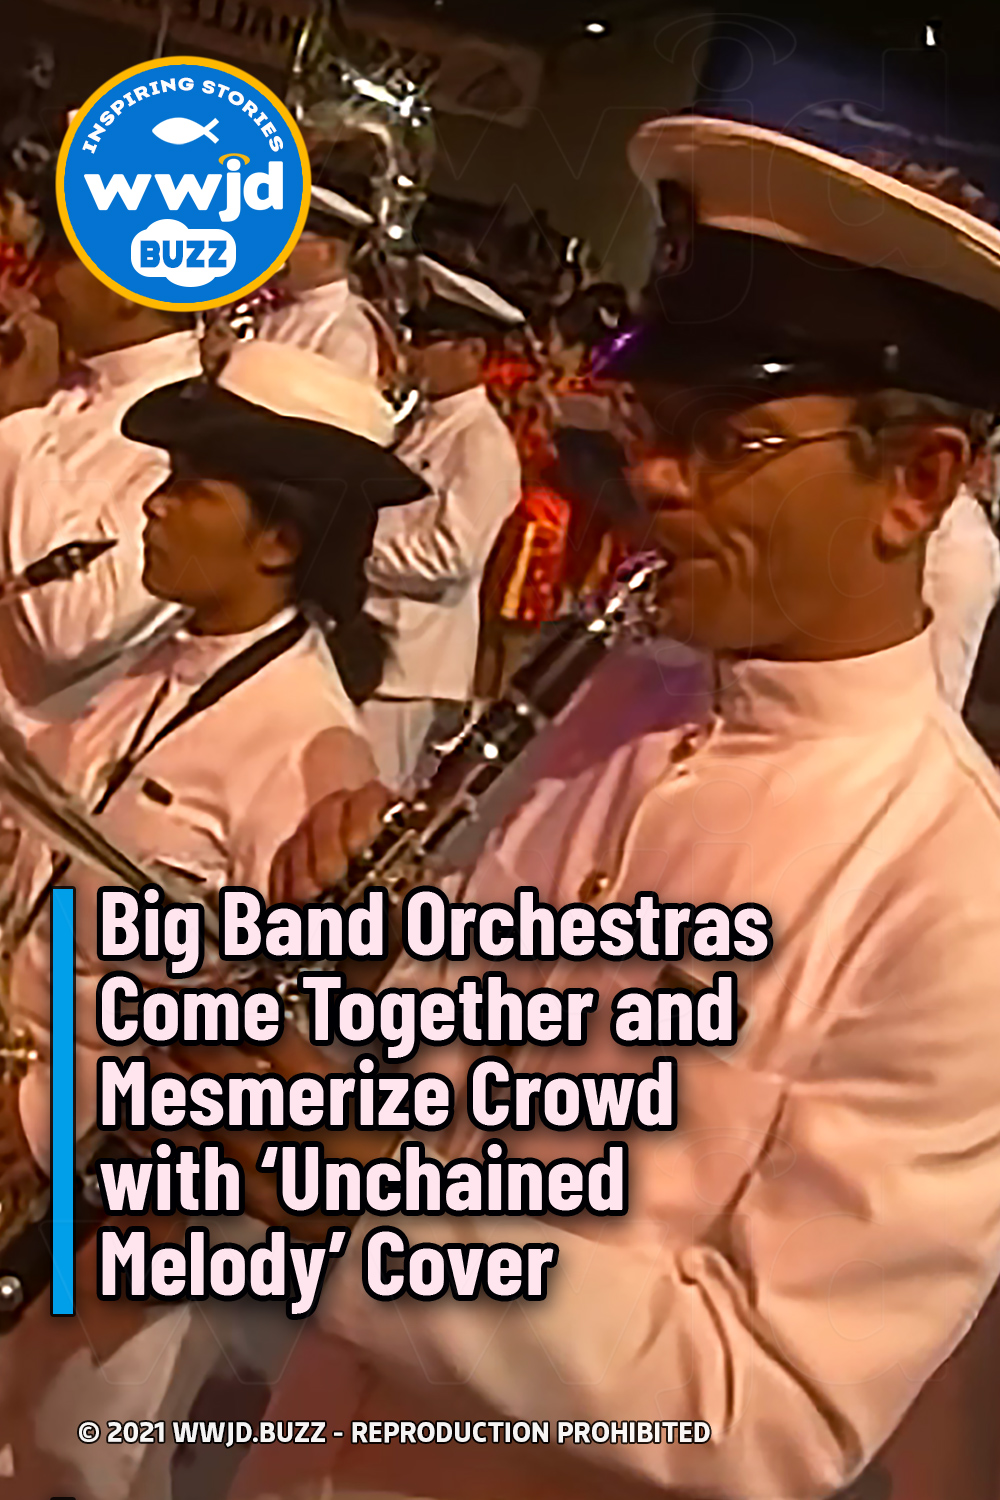 Big Band Orchestras Come Together and Mesmerize Crowd with ‘Unchained Melody’ Cover